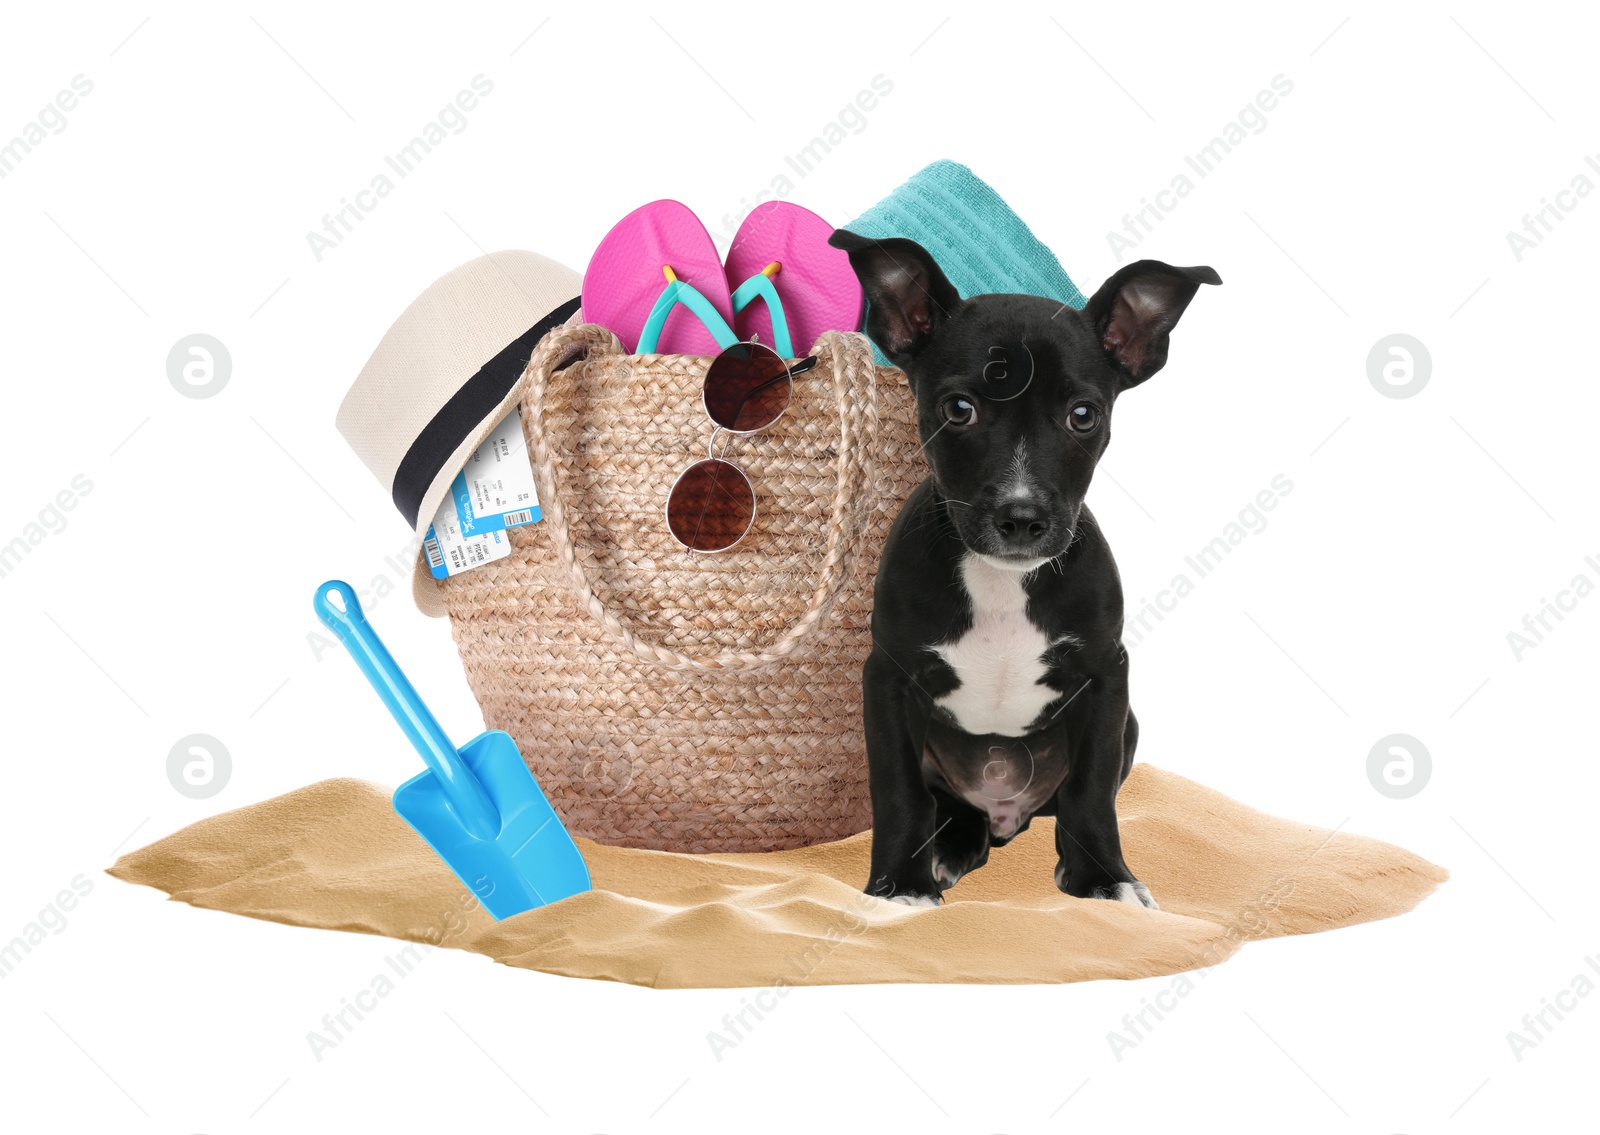 Image of Cute puppy and summer vacation items on sand against white background. Travelling with pet